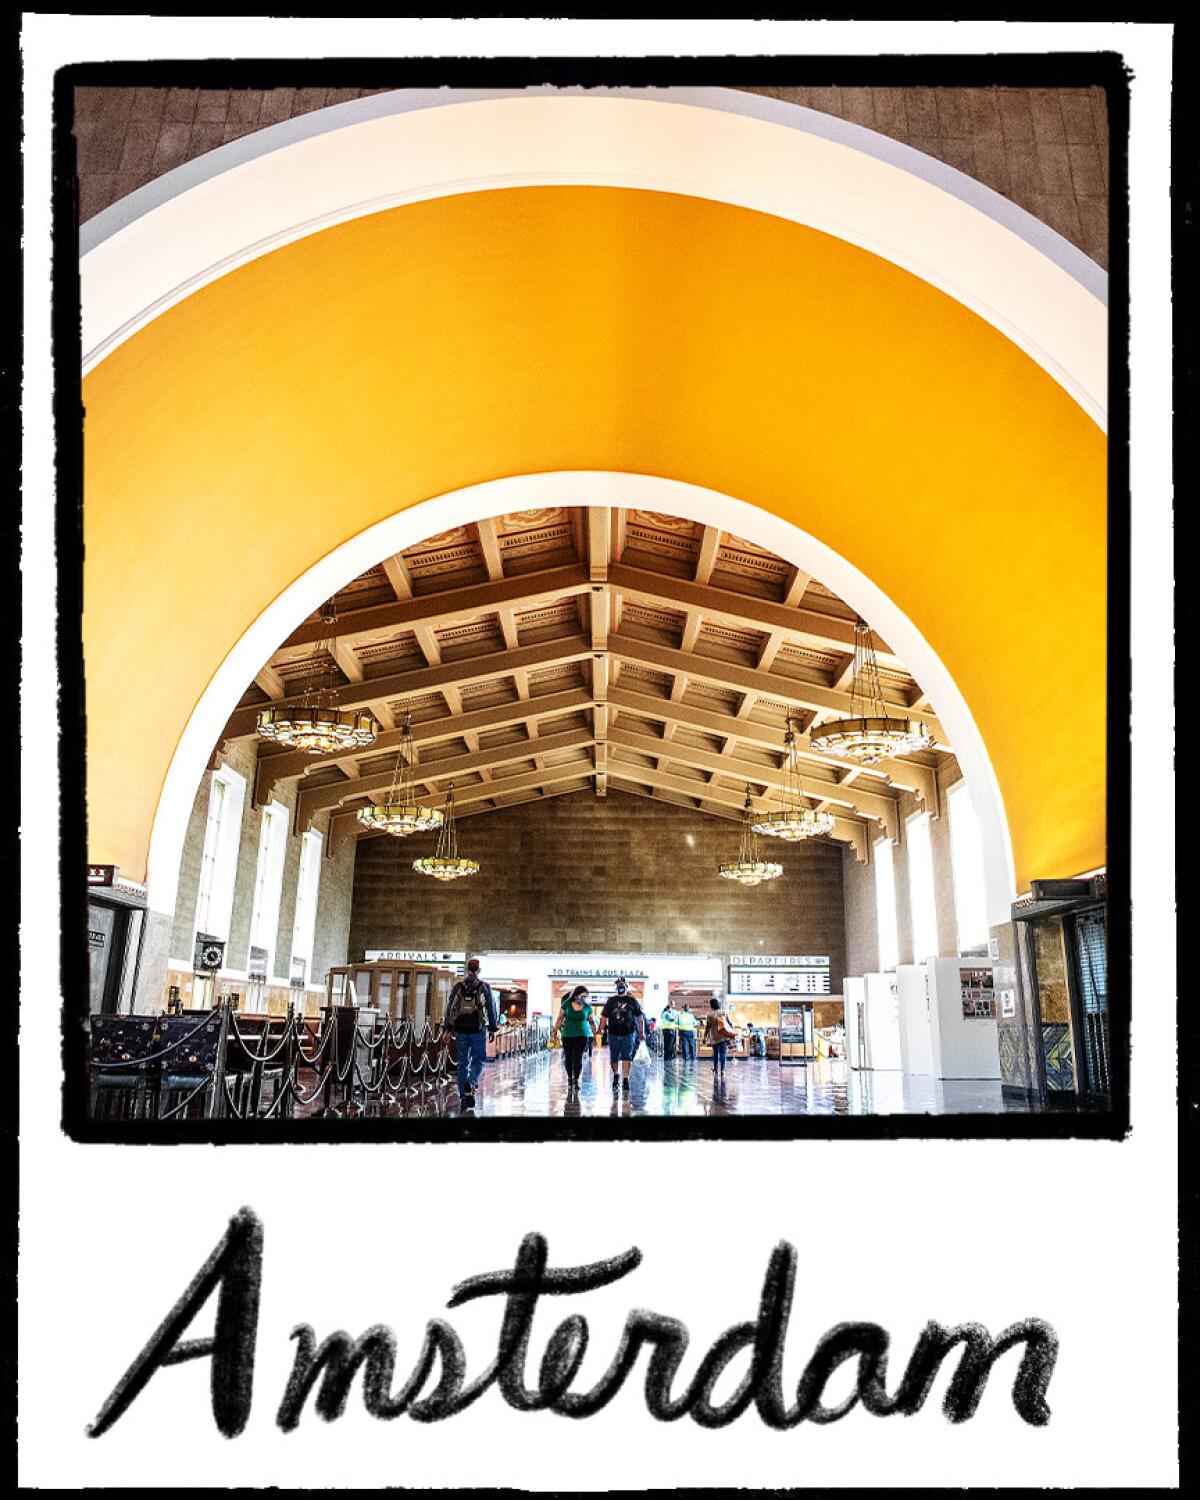 Over a photo of the interior of a railroad station, an illustration has the word "Amsterdam."